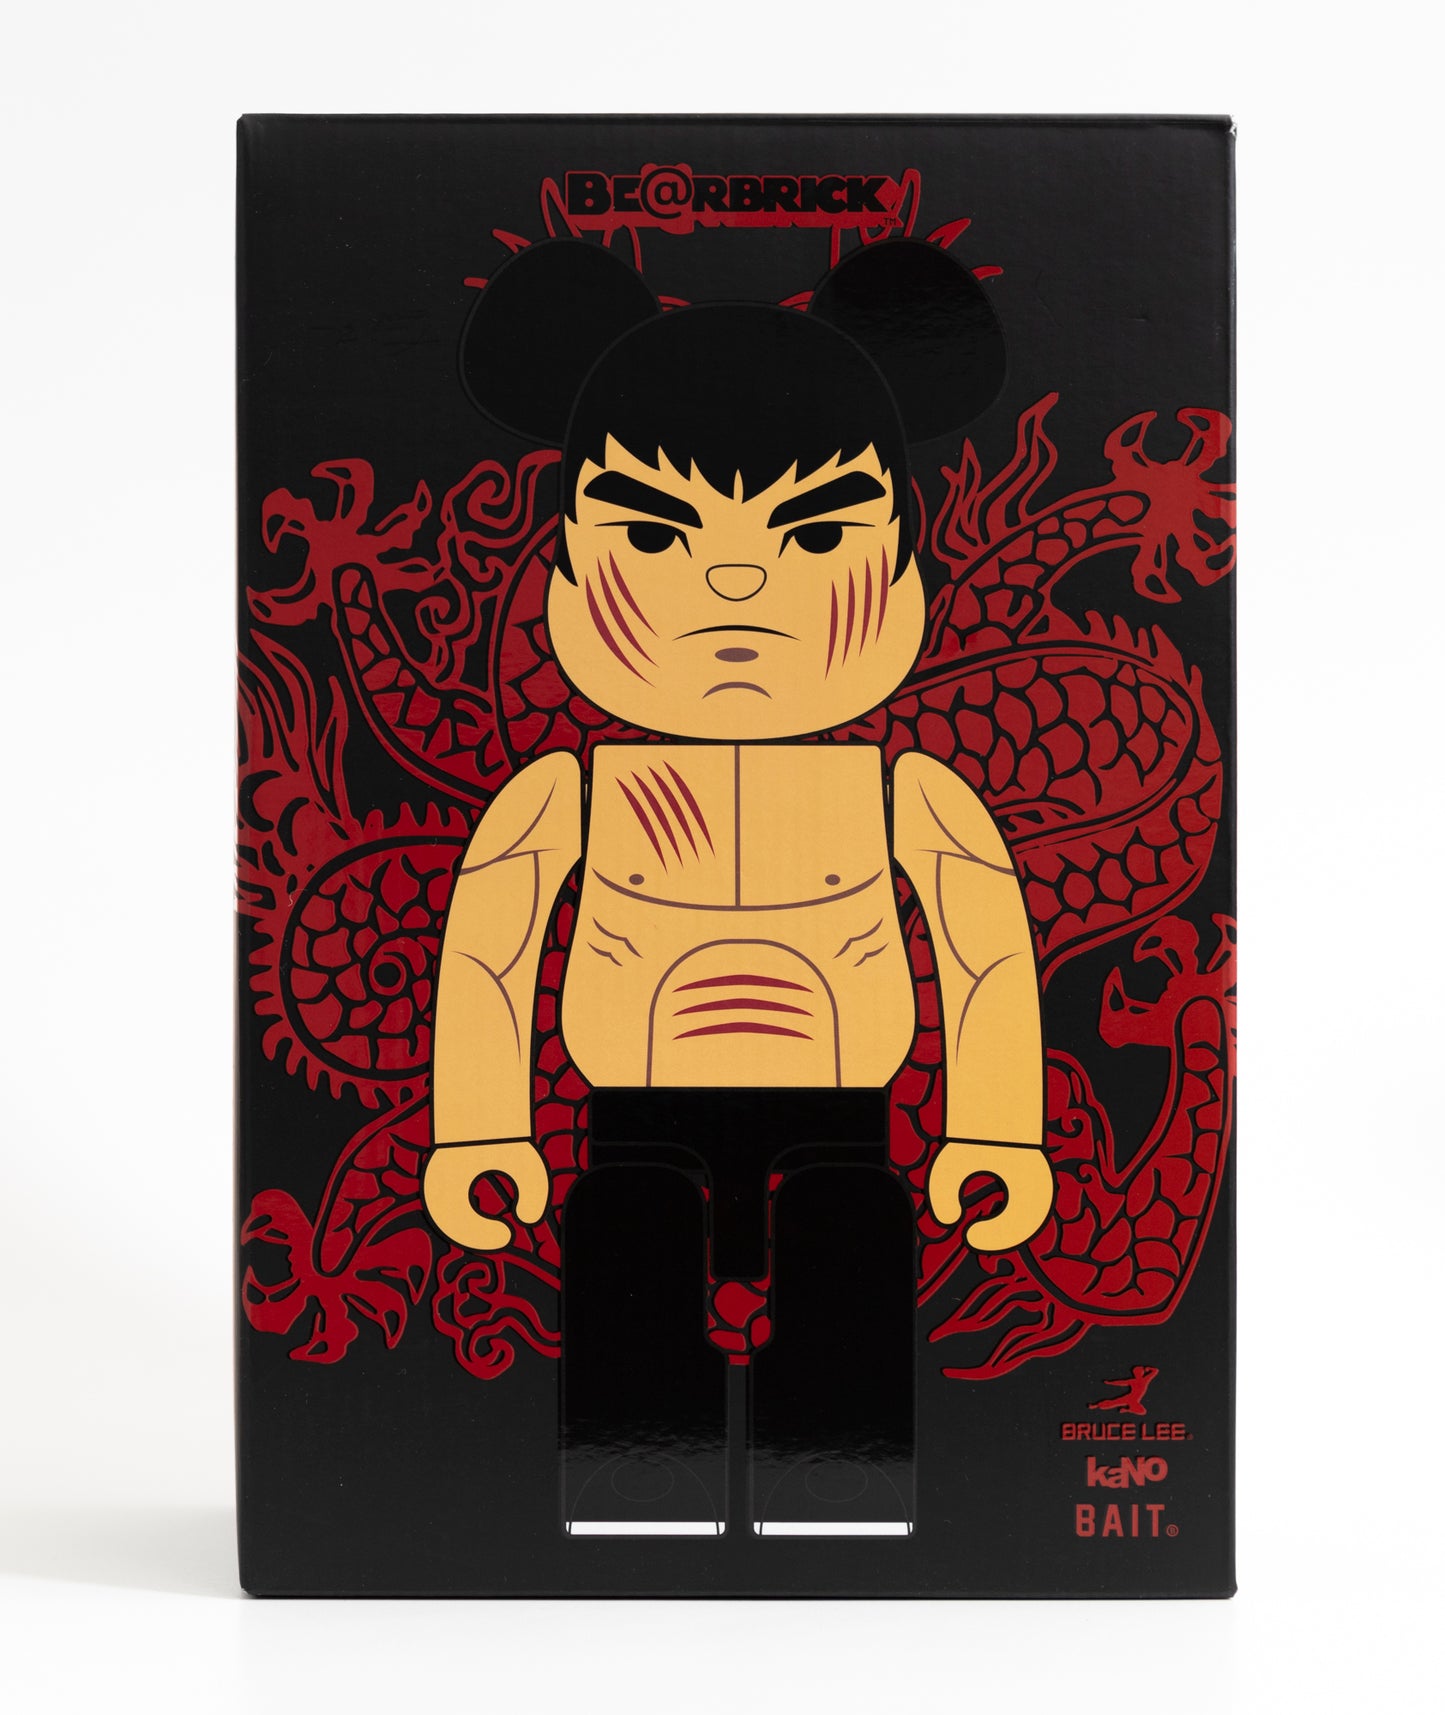 BE@RBRICK - "Bruce Lee" by KANO limited edition 400% & 100%